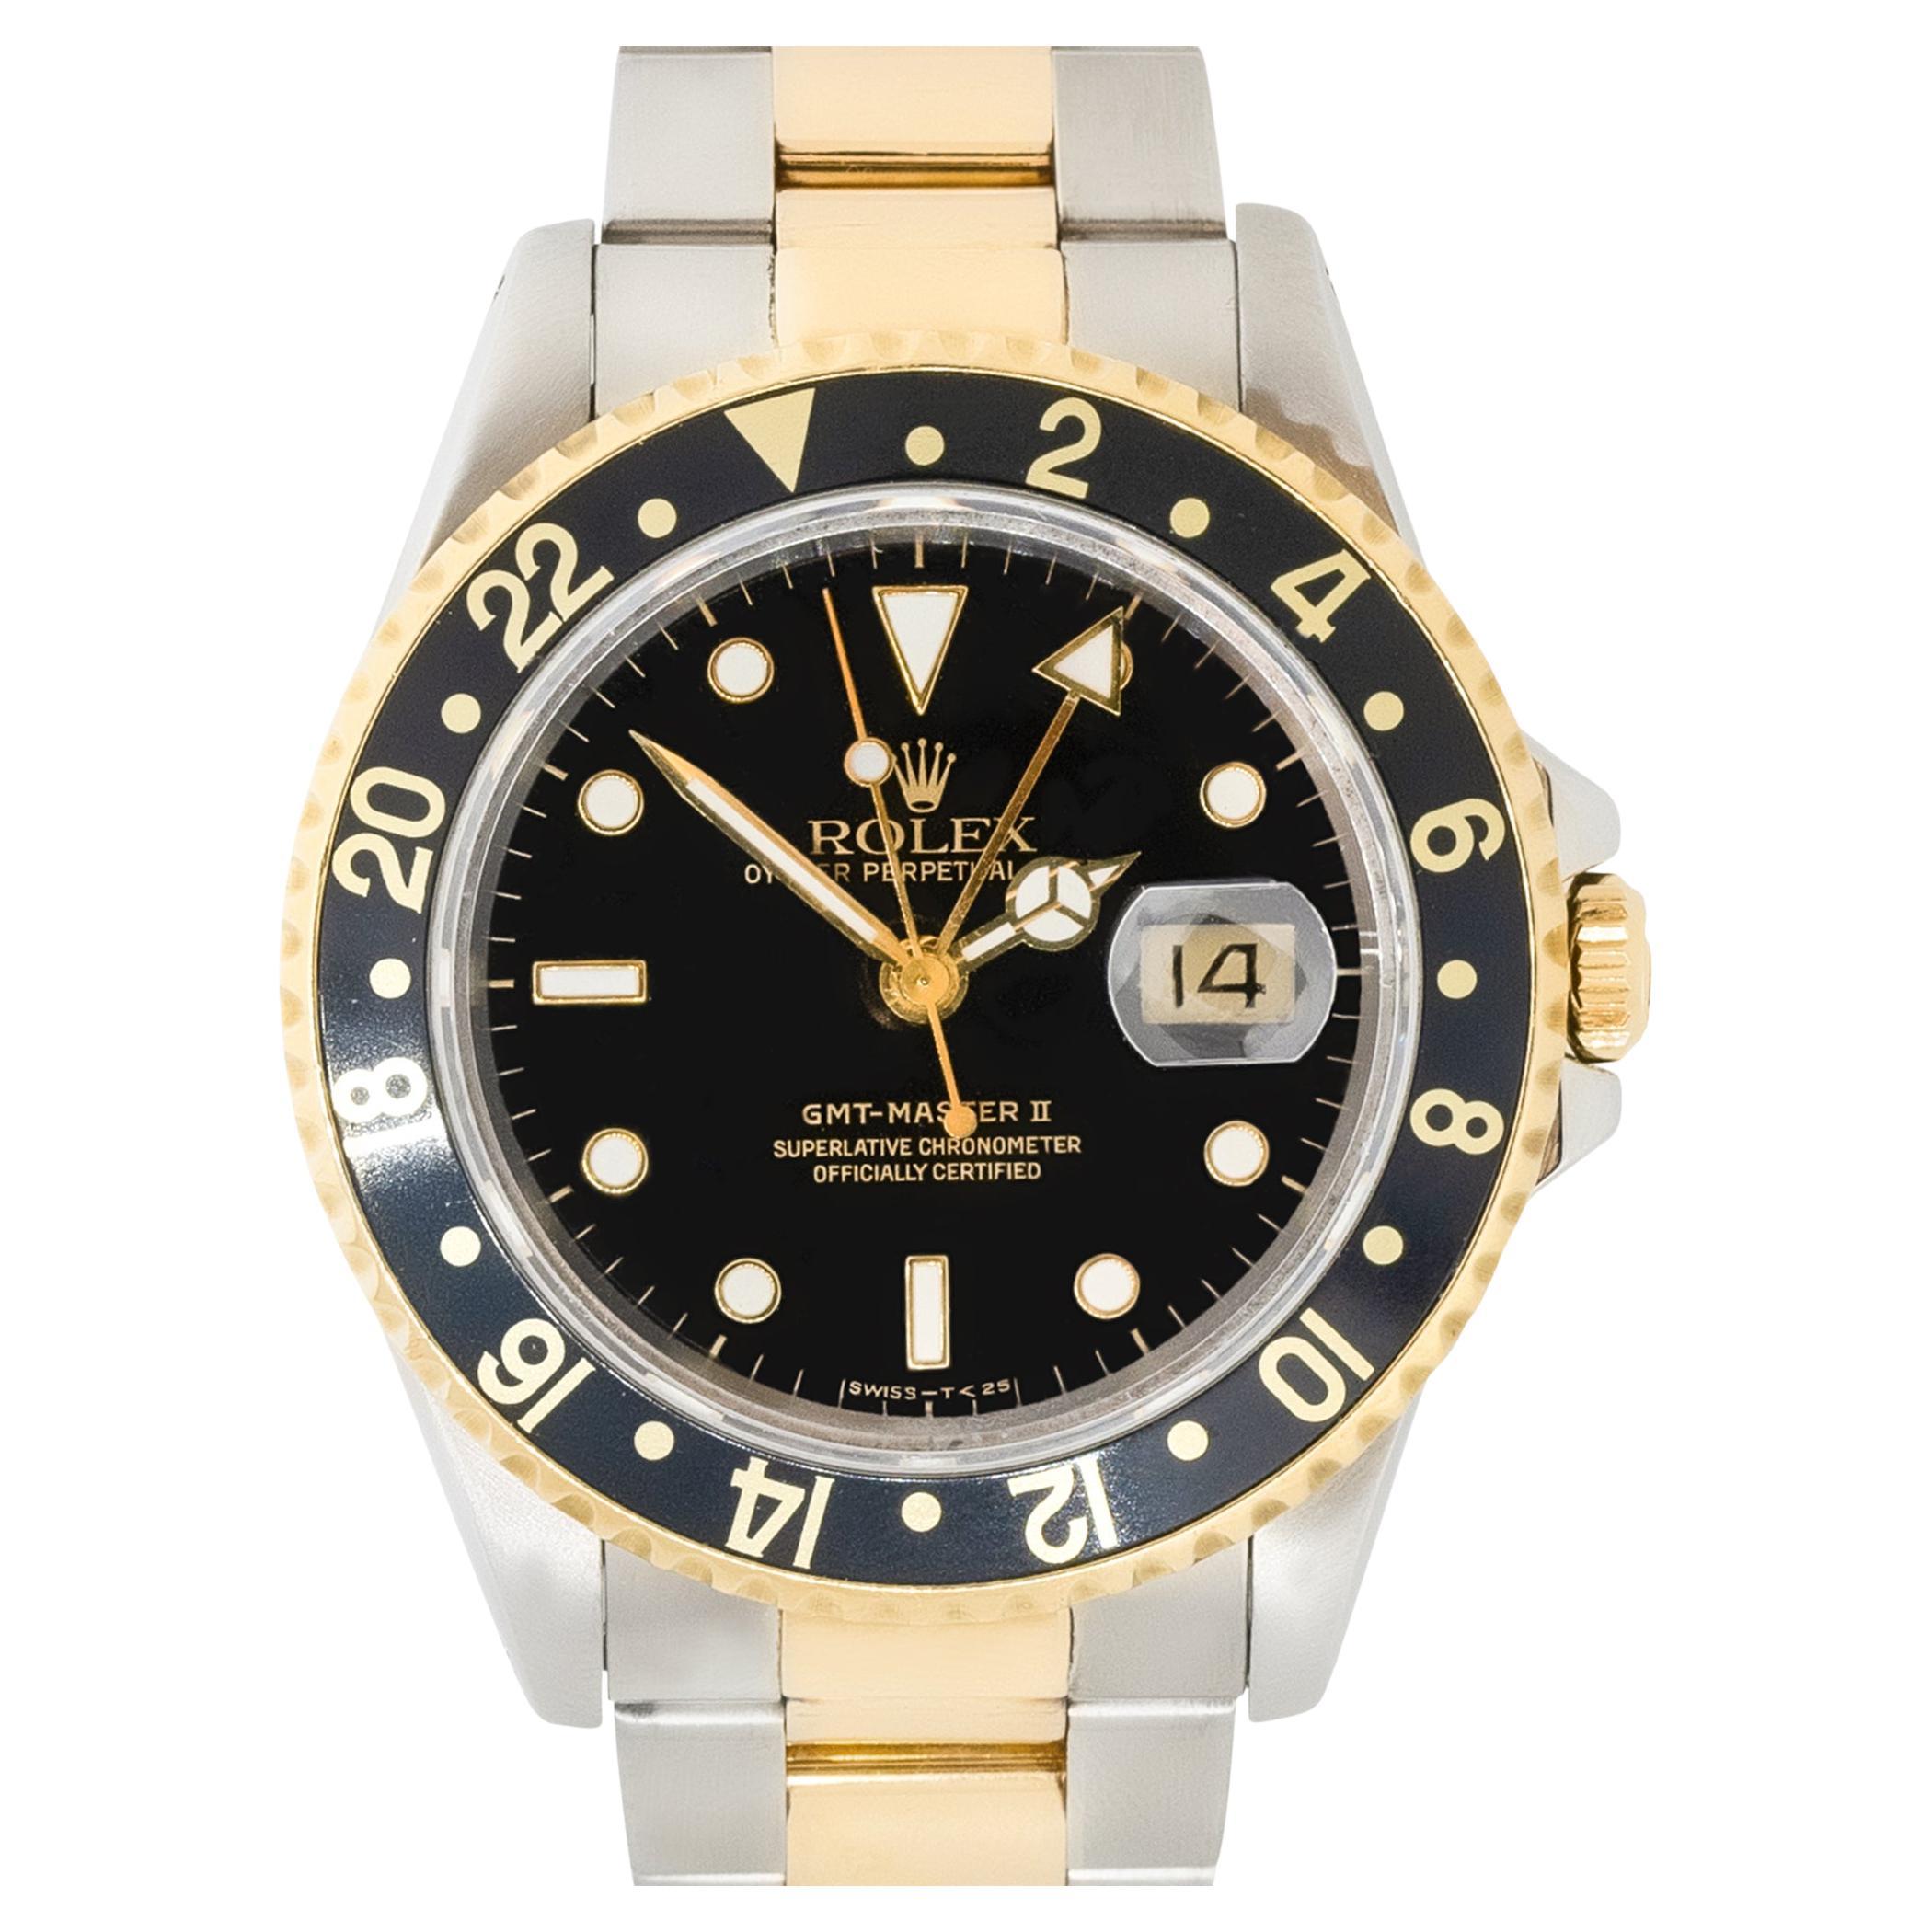 Rolex 16713 GMT-Master II Two Tone Black Dial Watch in Stock